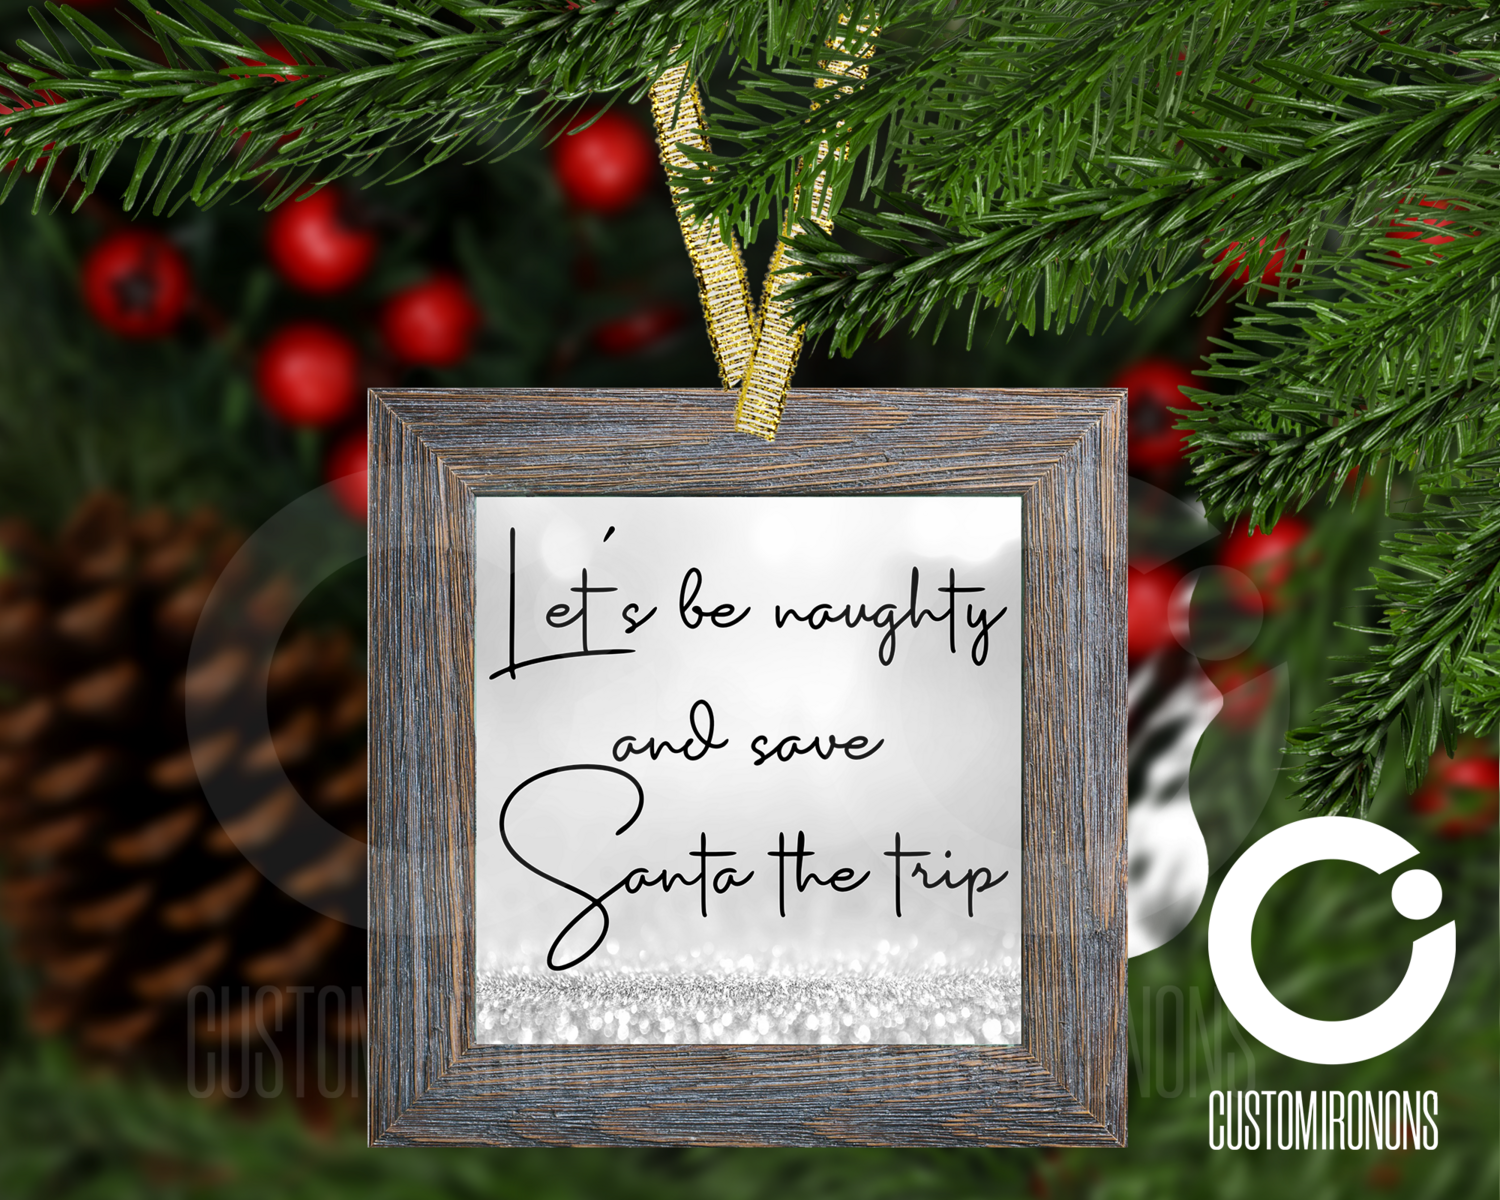 Let's be naughty and save Santa the trip - Winter Holiday Frame Ornament